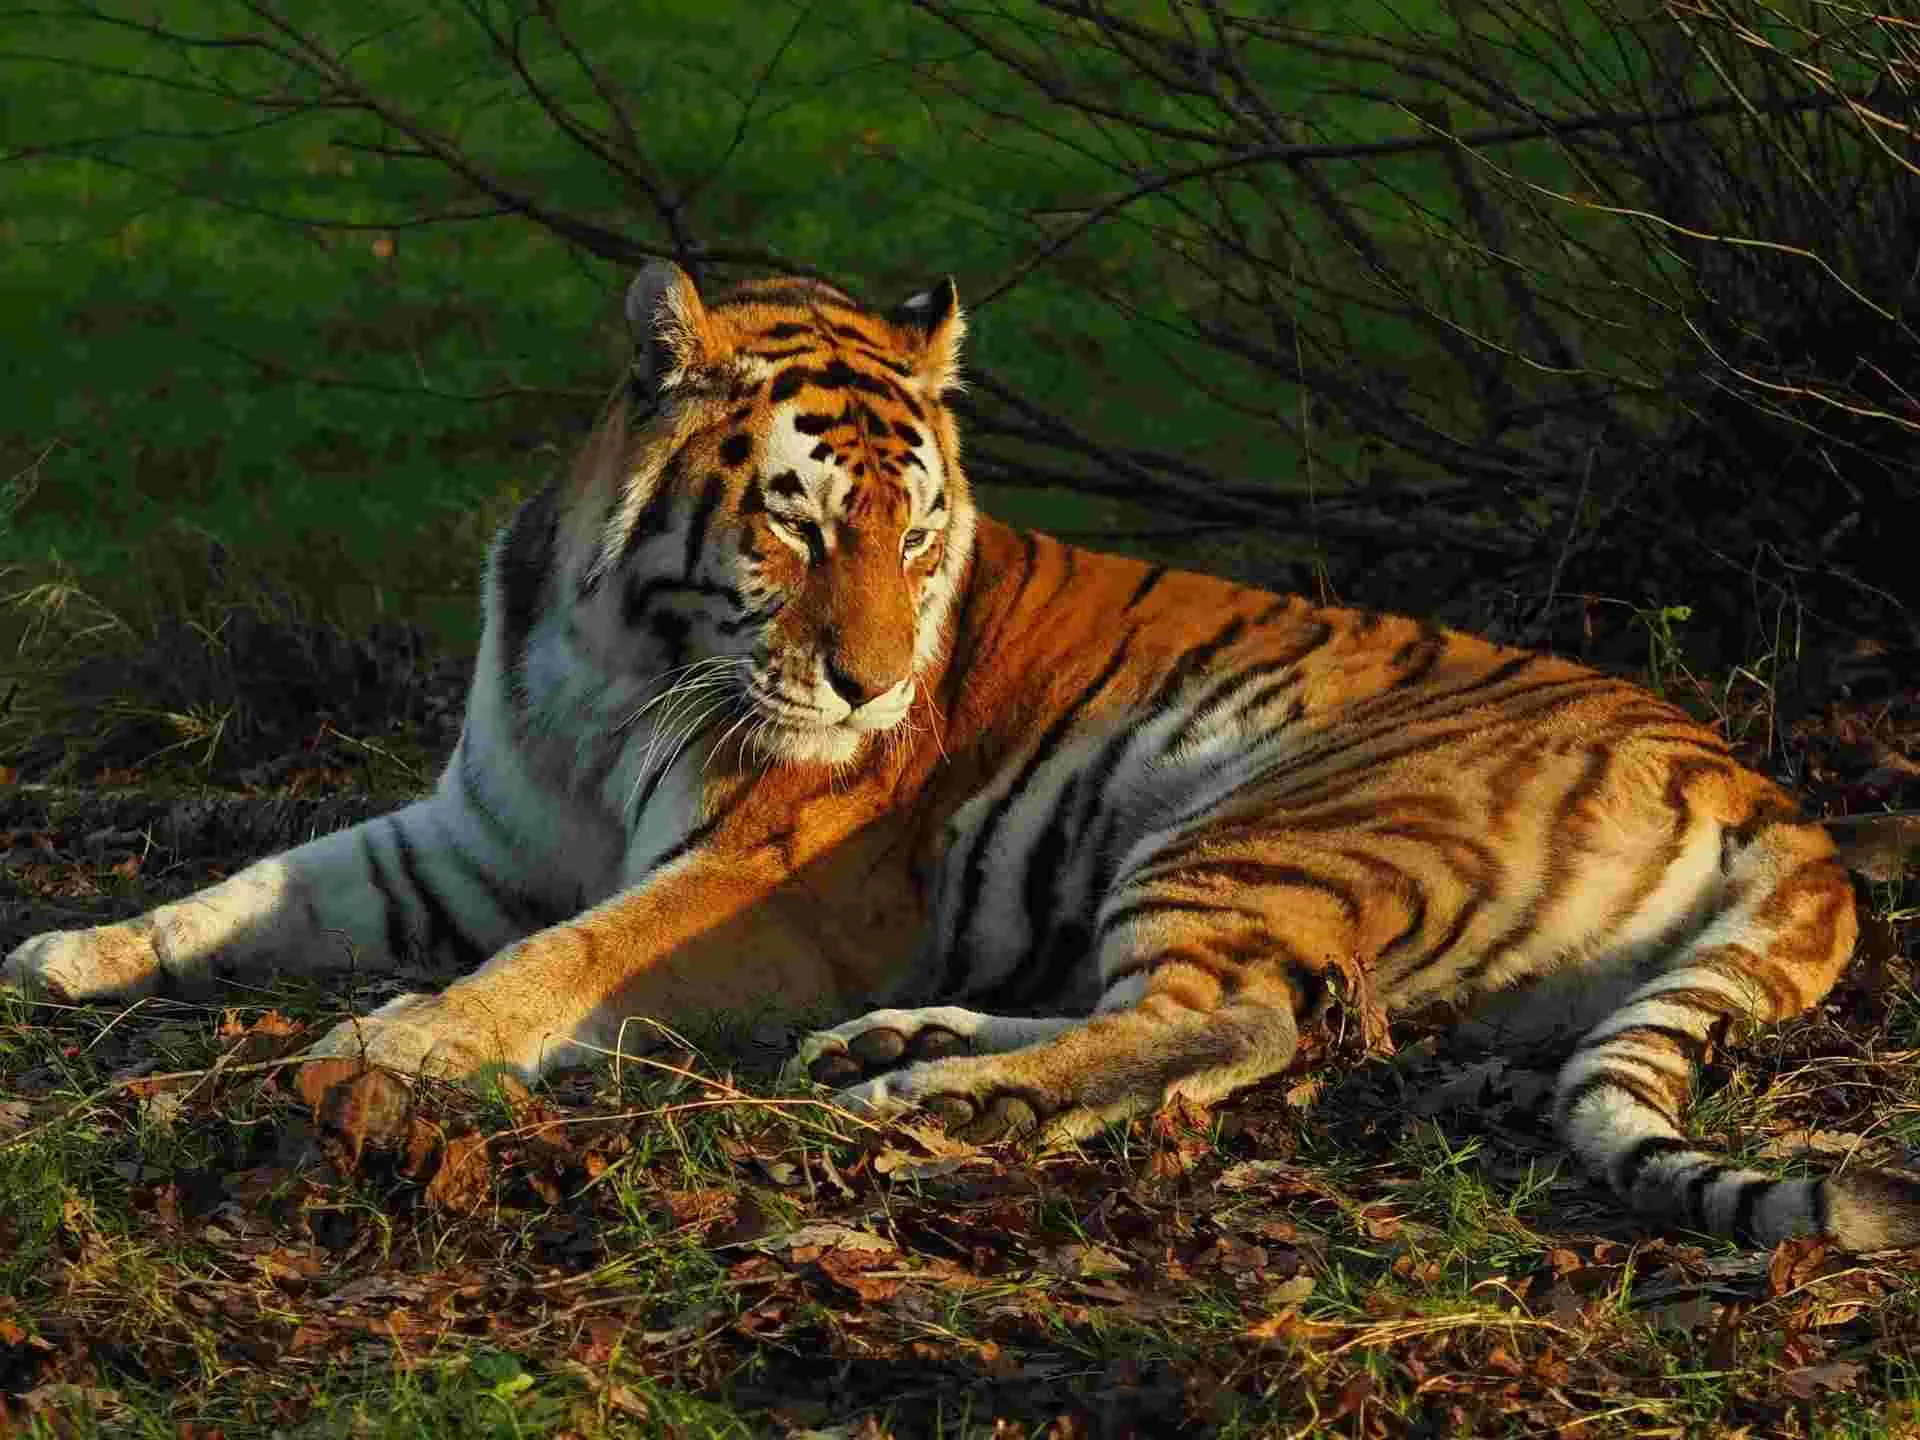 The Siberian tiger is the biggest tiger.